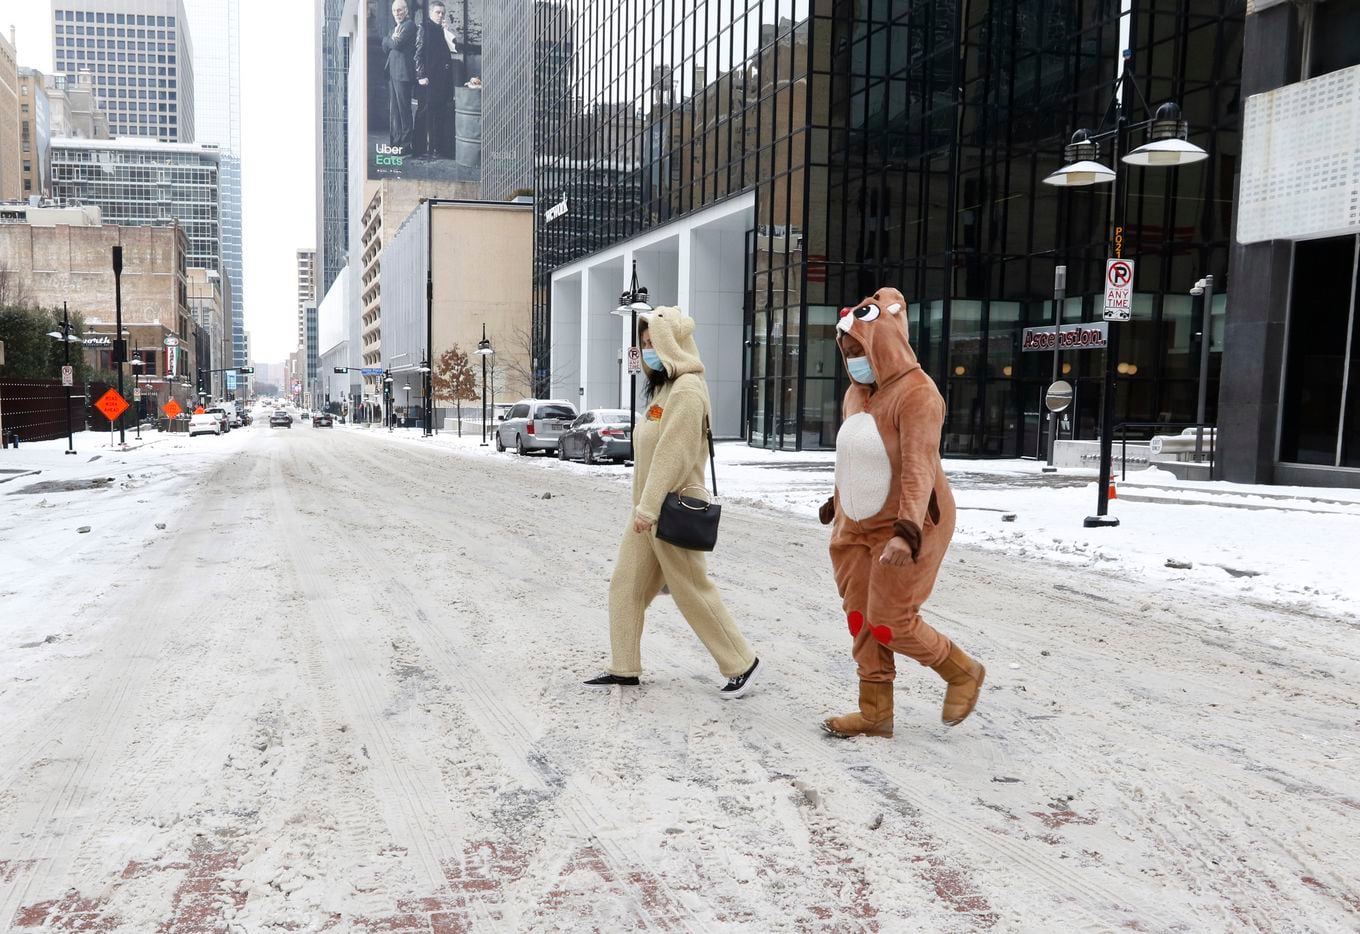 Leighanne Katz, left, dressed in a Thunder Buddies costume and Billian Lawal, right, in a...